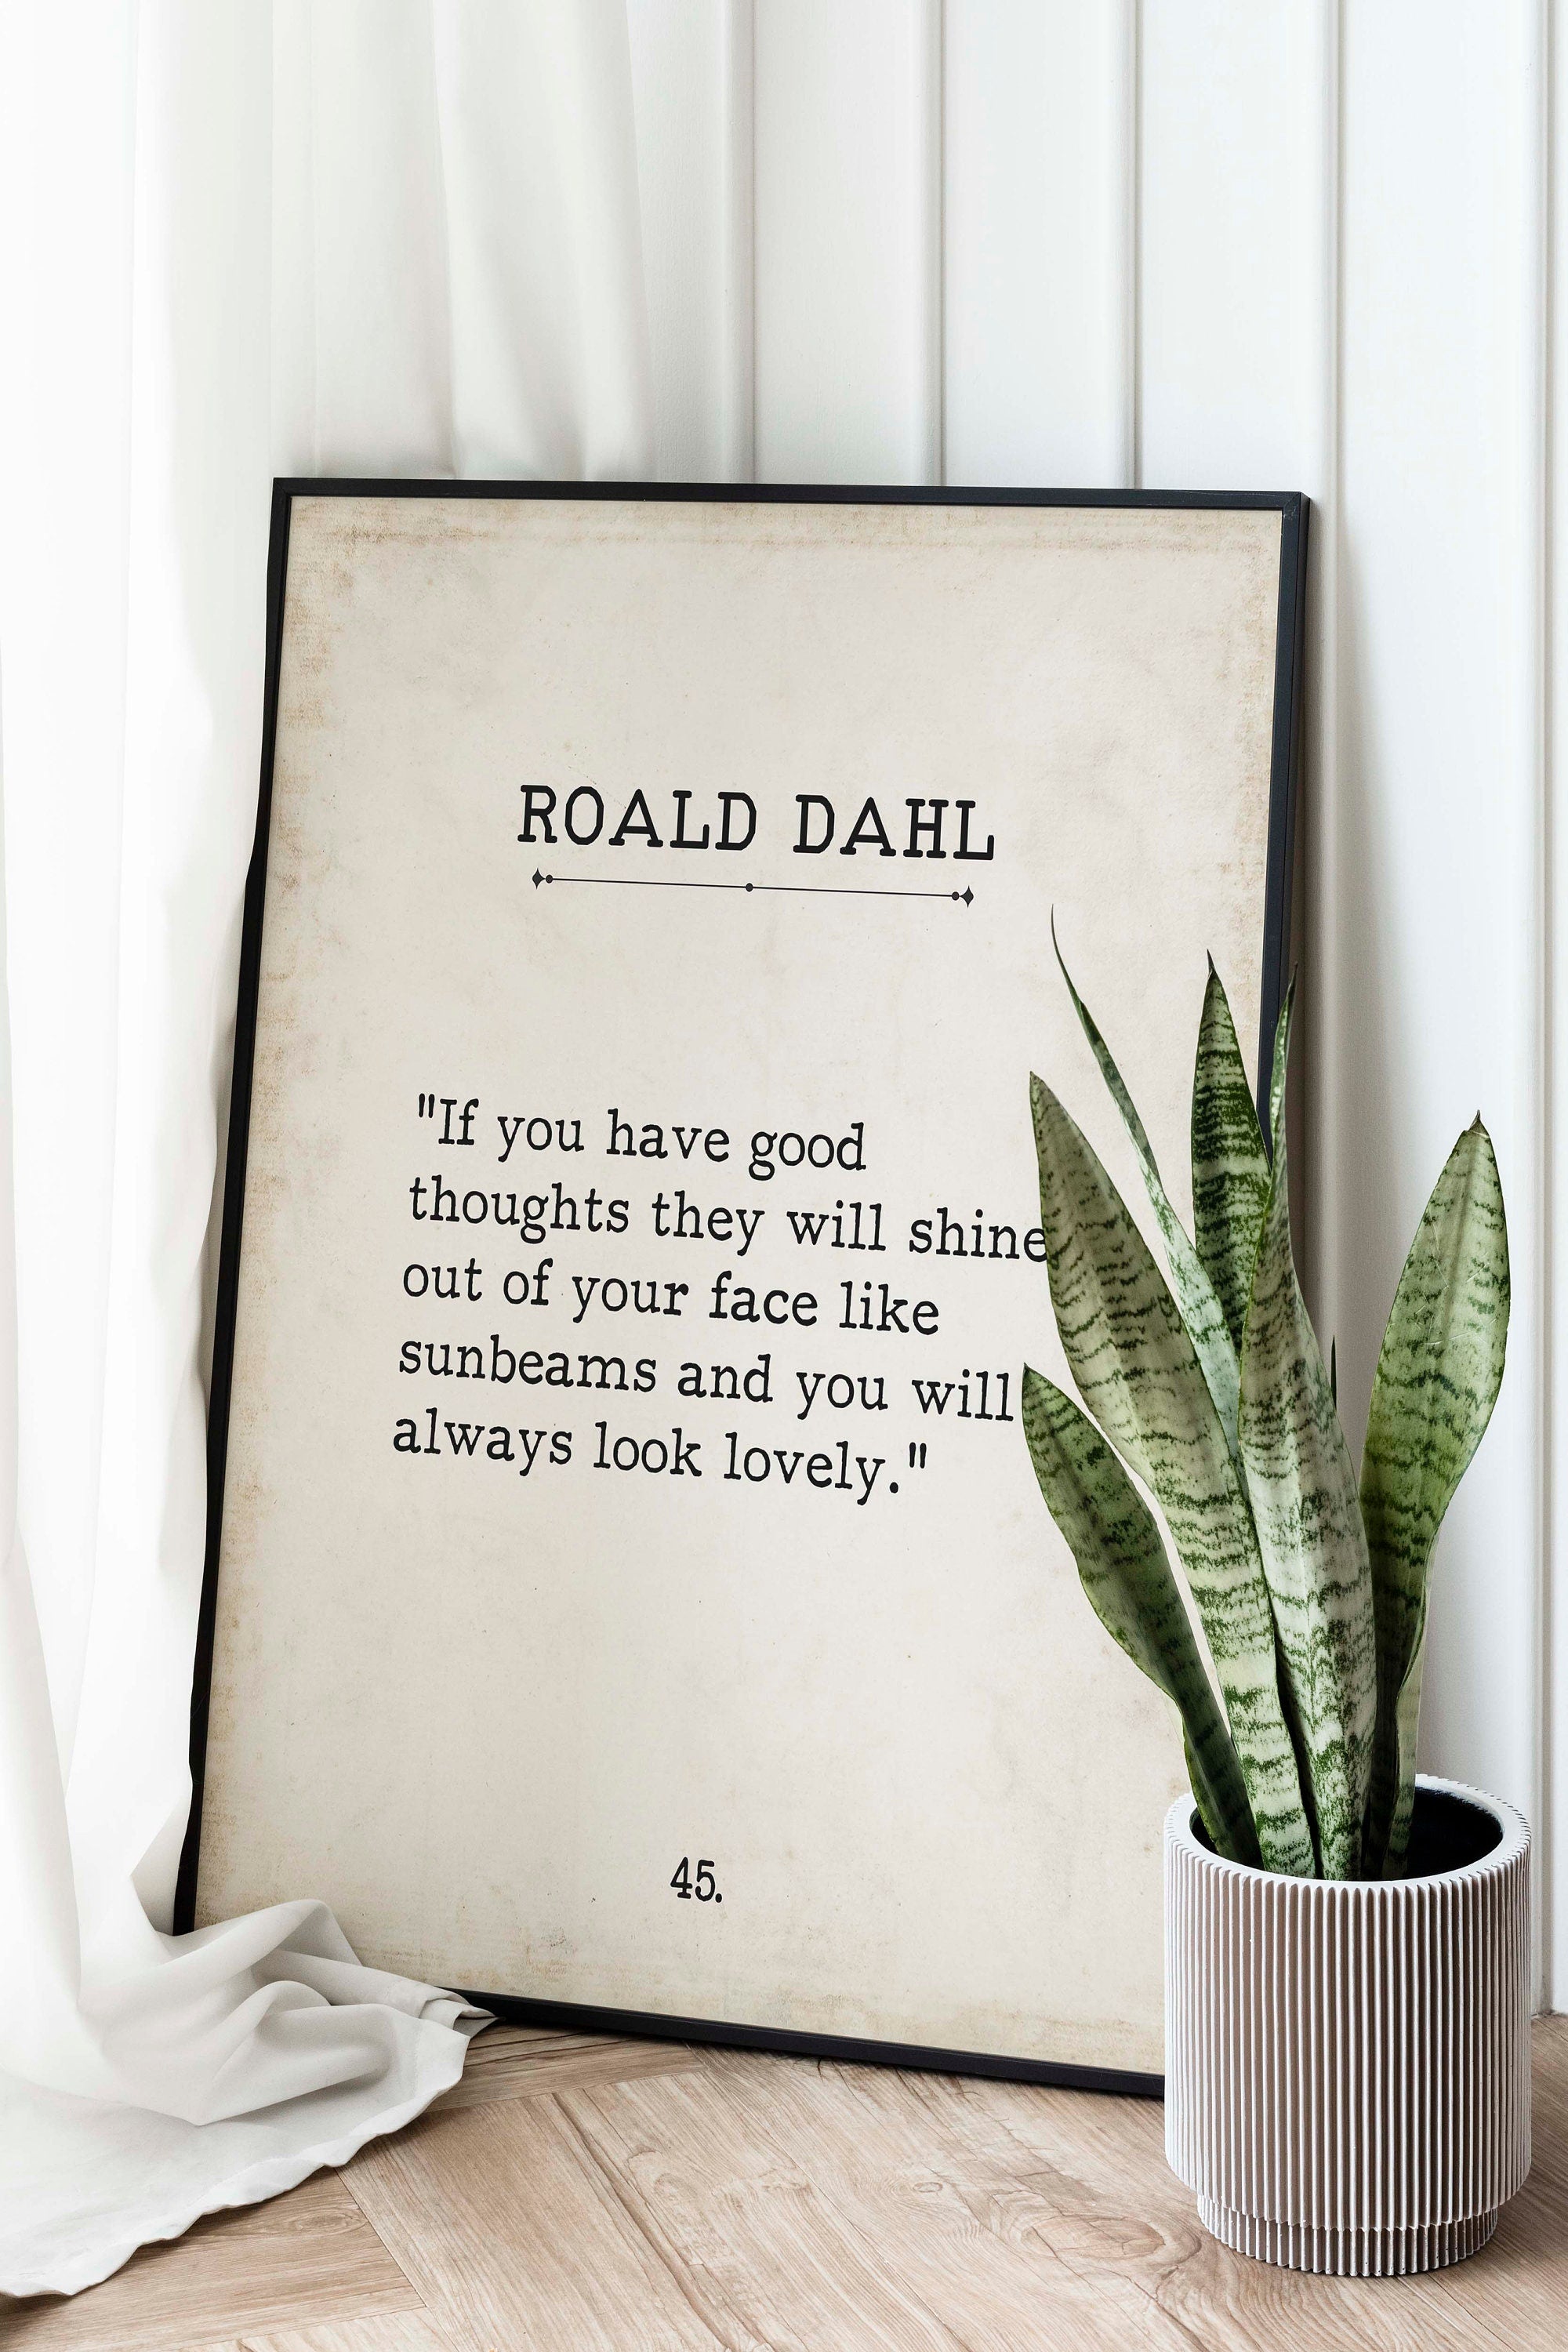 Roald Dahl Book Page Inspirational Wall Art, If You Have Good Thoughts Quote Vintage Style Print for Living Room or Bedroom Wall Decor